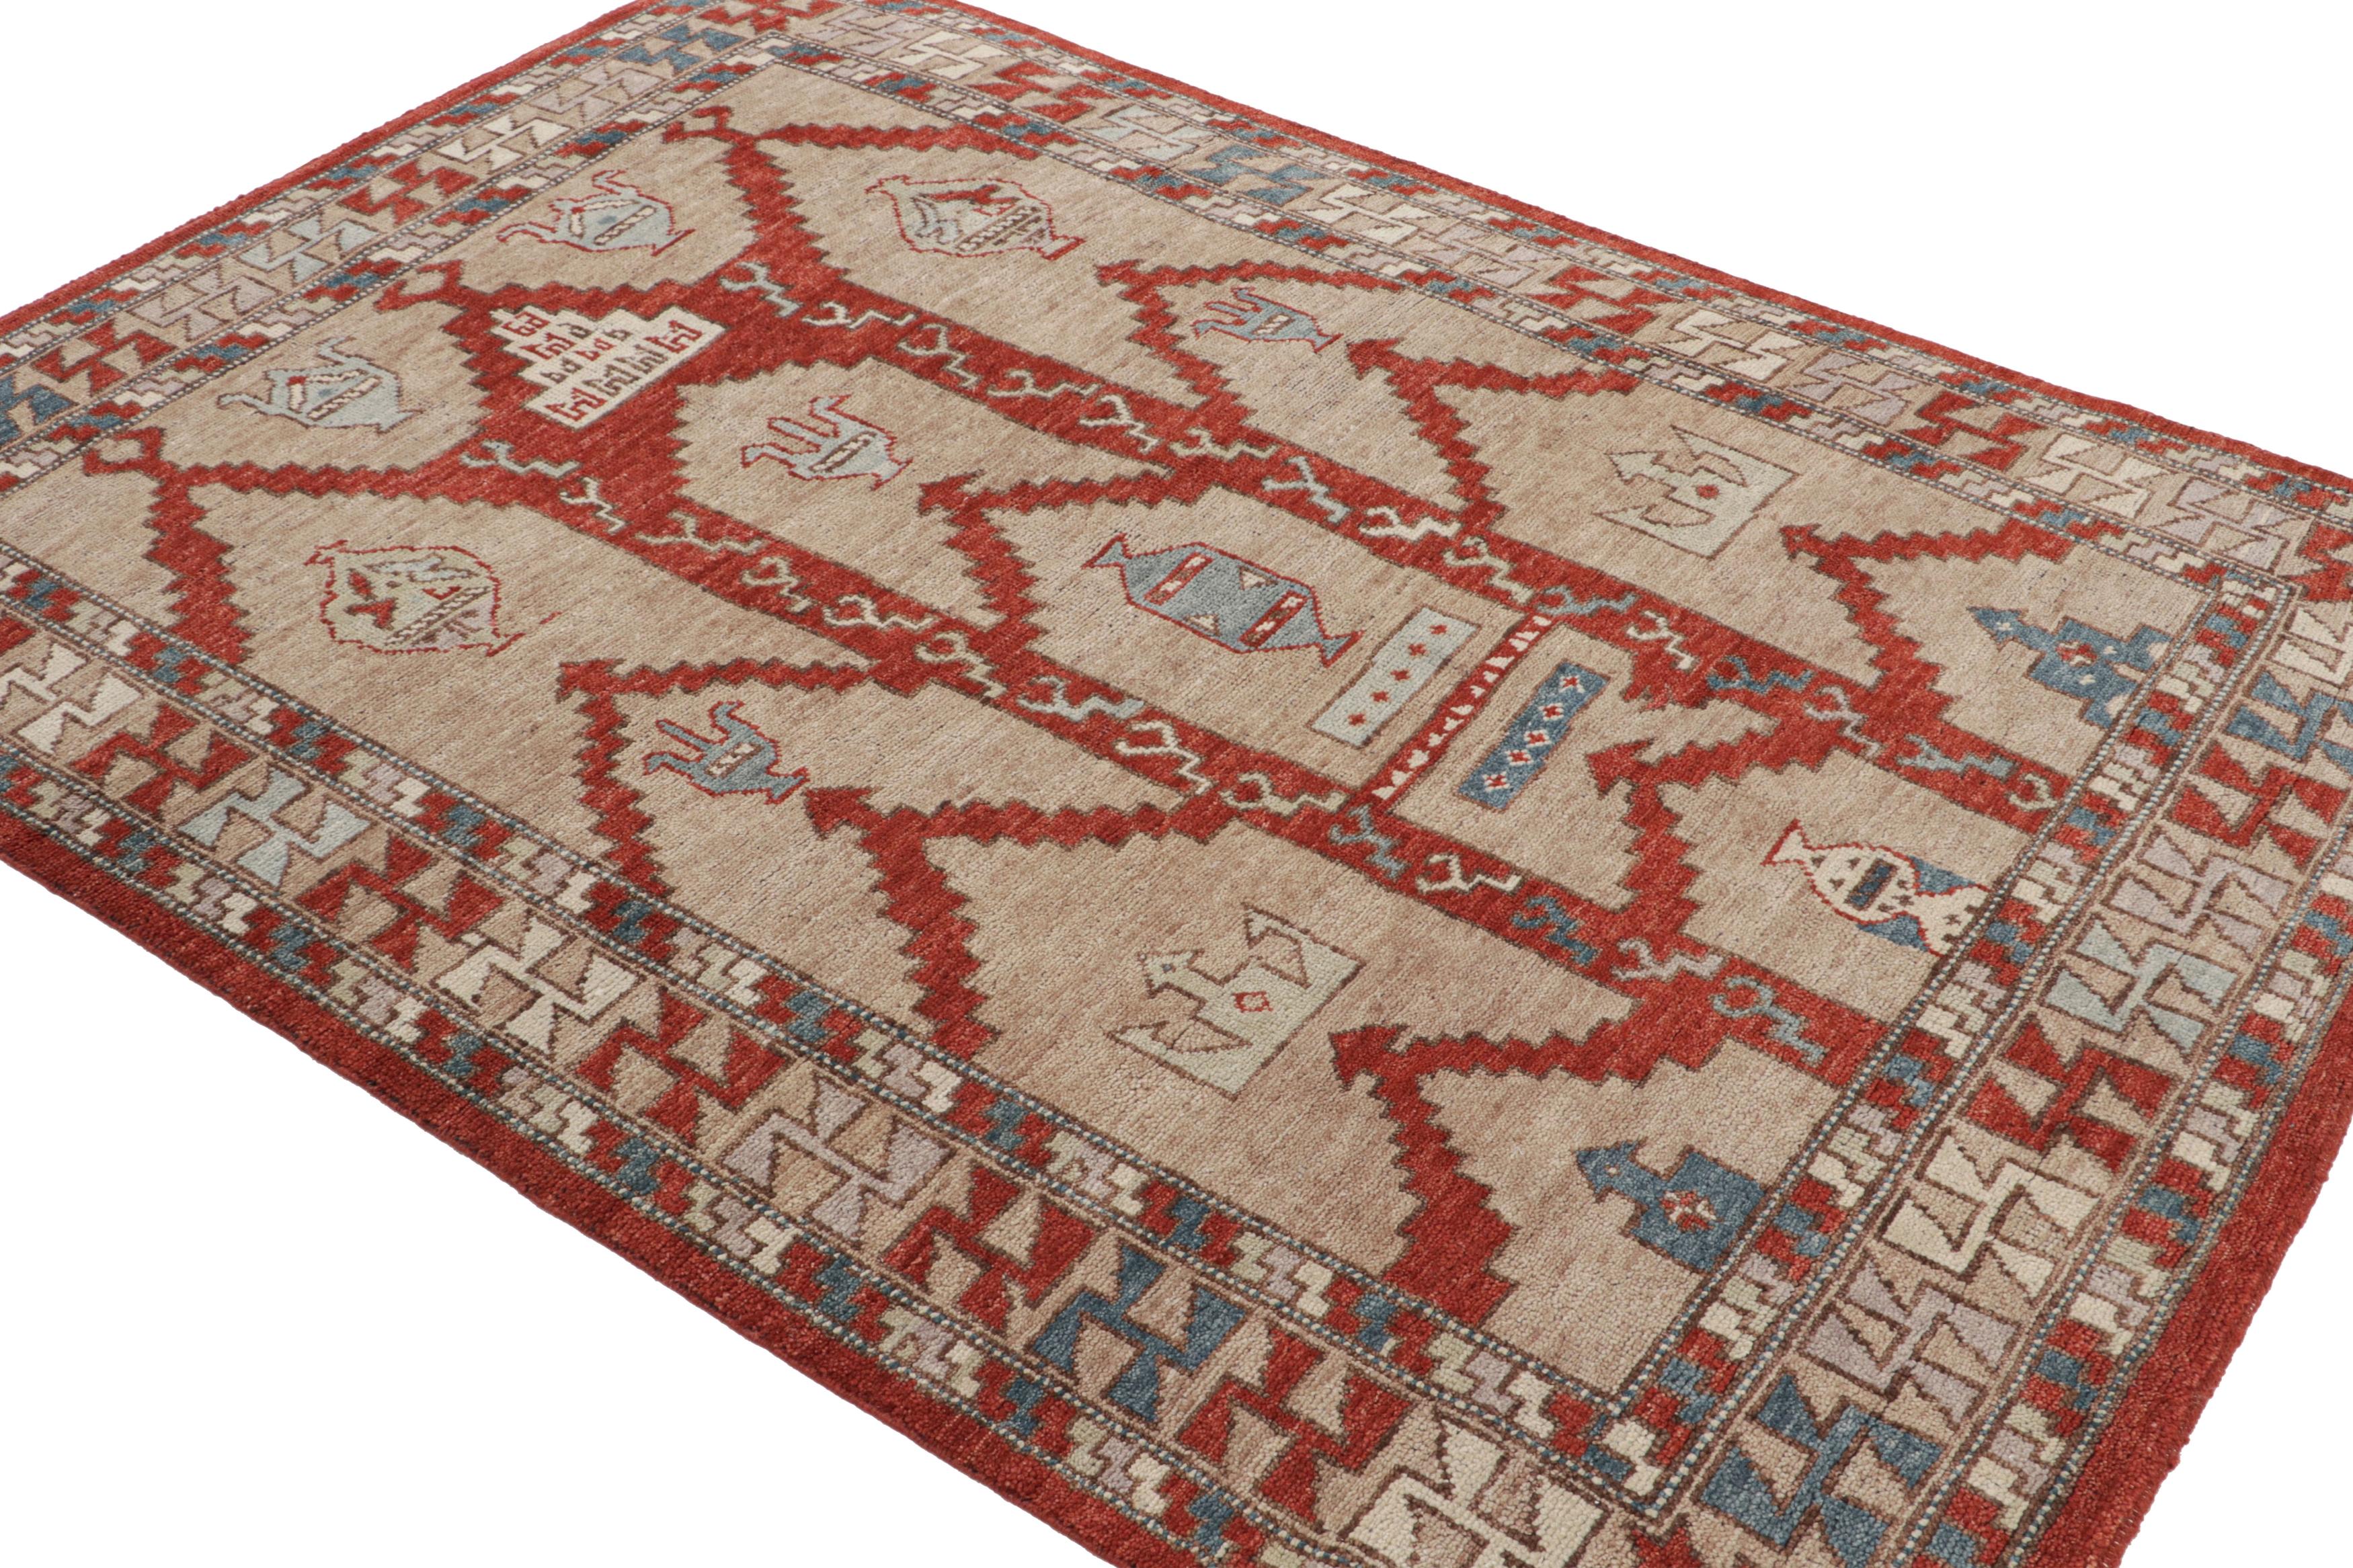 Hand-Knotted Rug & Kilim’s Tribal Style Rug in Red and Beige-Brown All Over Geometric Pattern For Sale